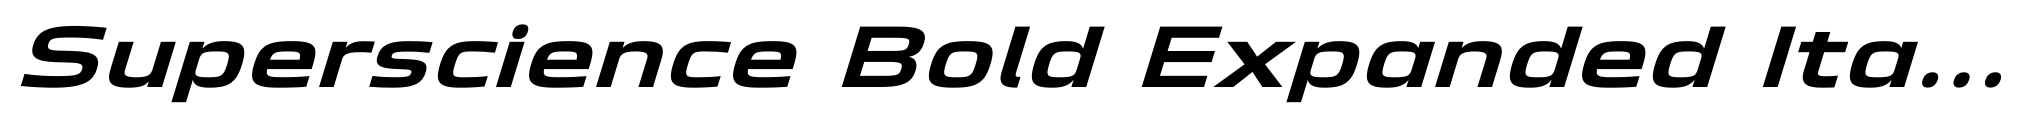 Superscience Bold Expanded Italic image